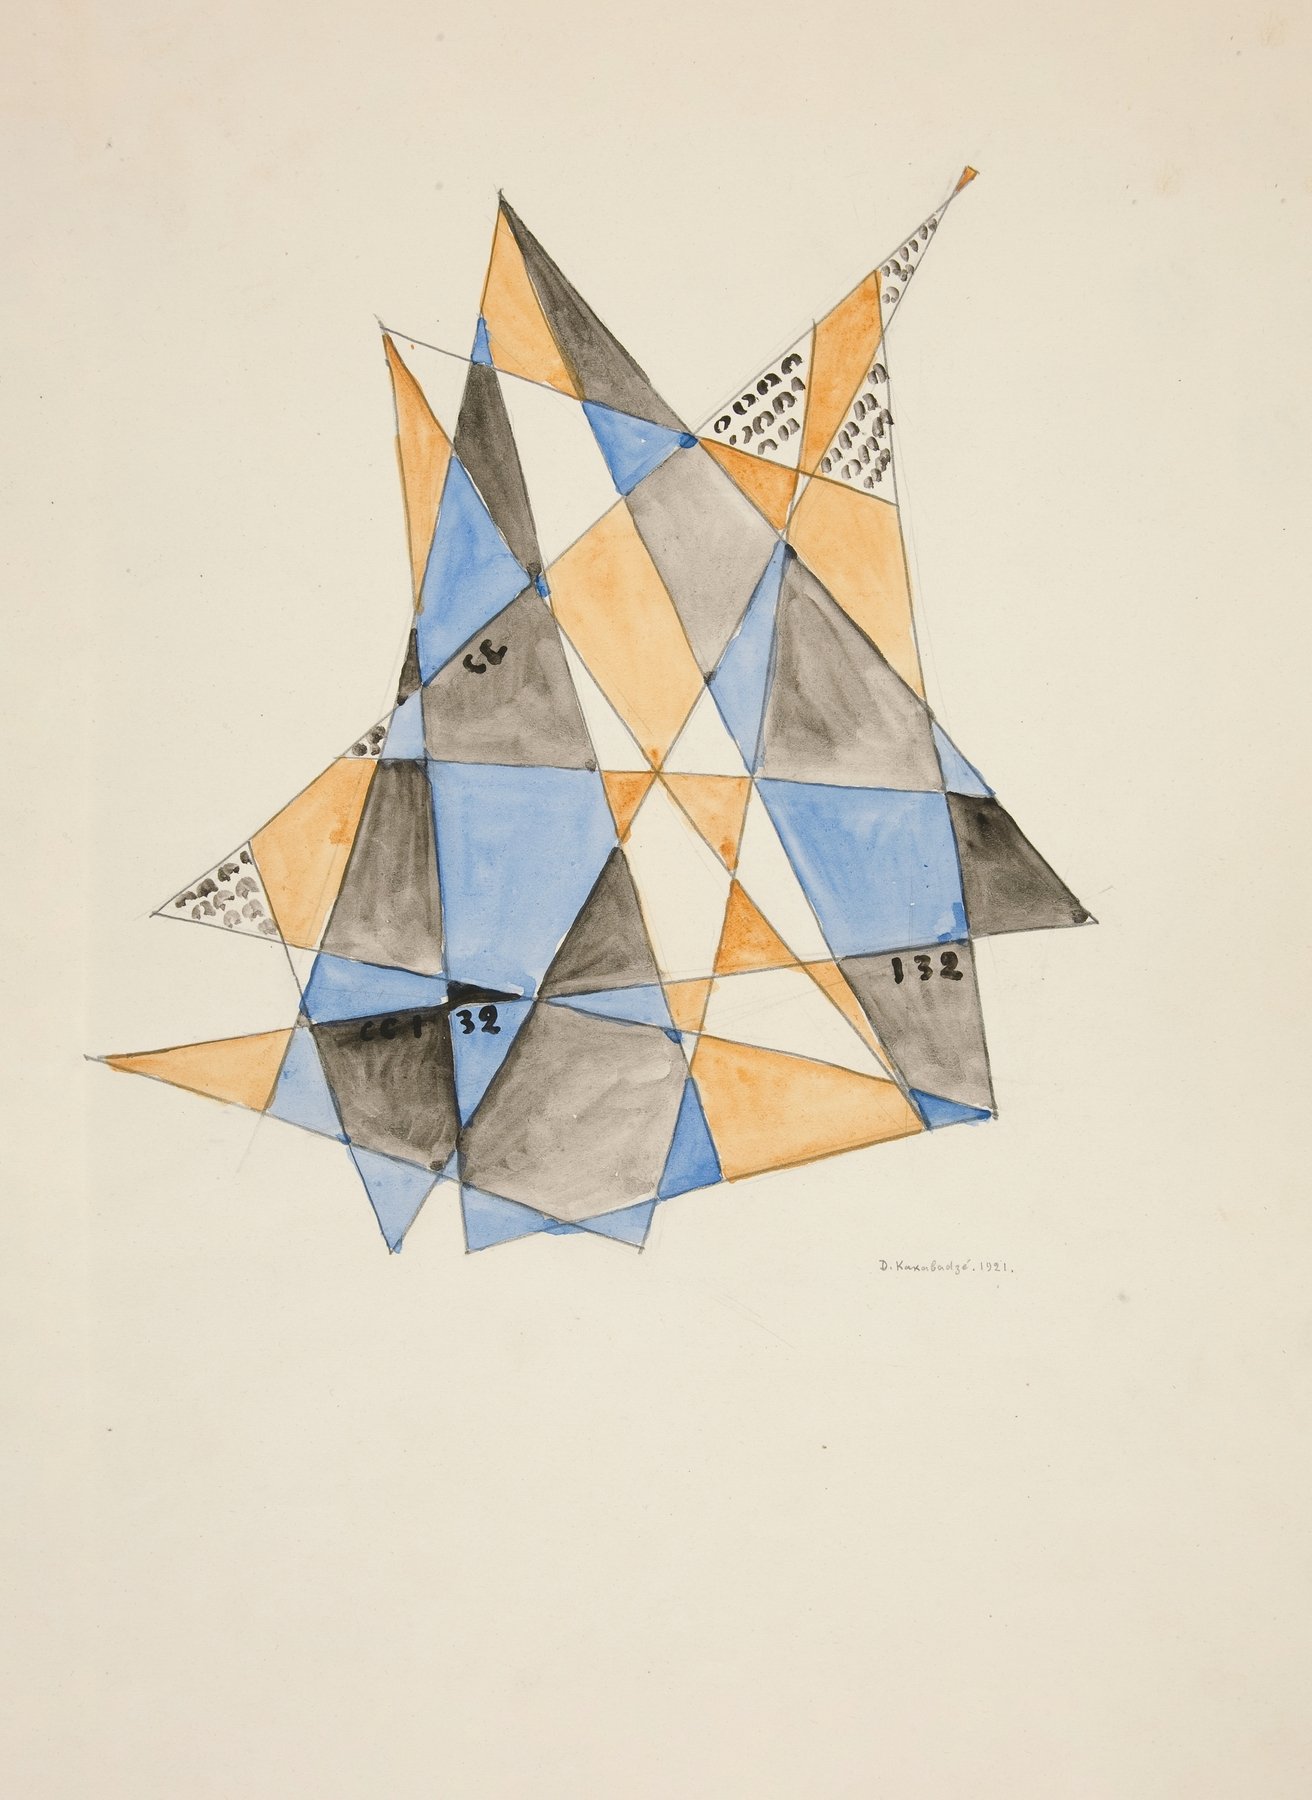 Abstraction Based on Sails,VI (1921)